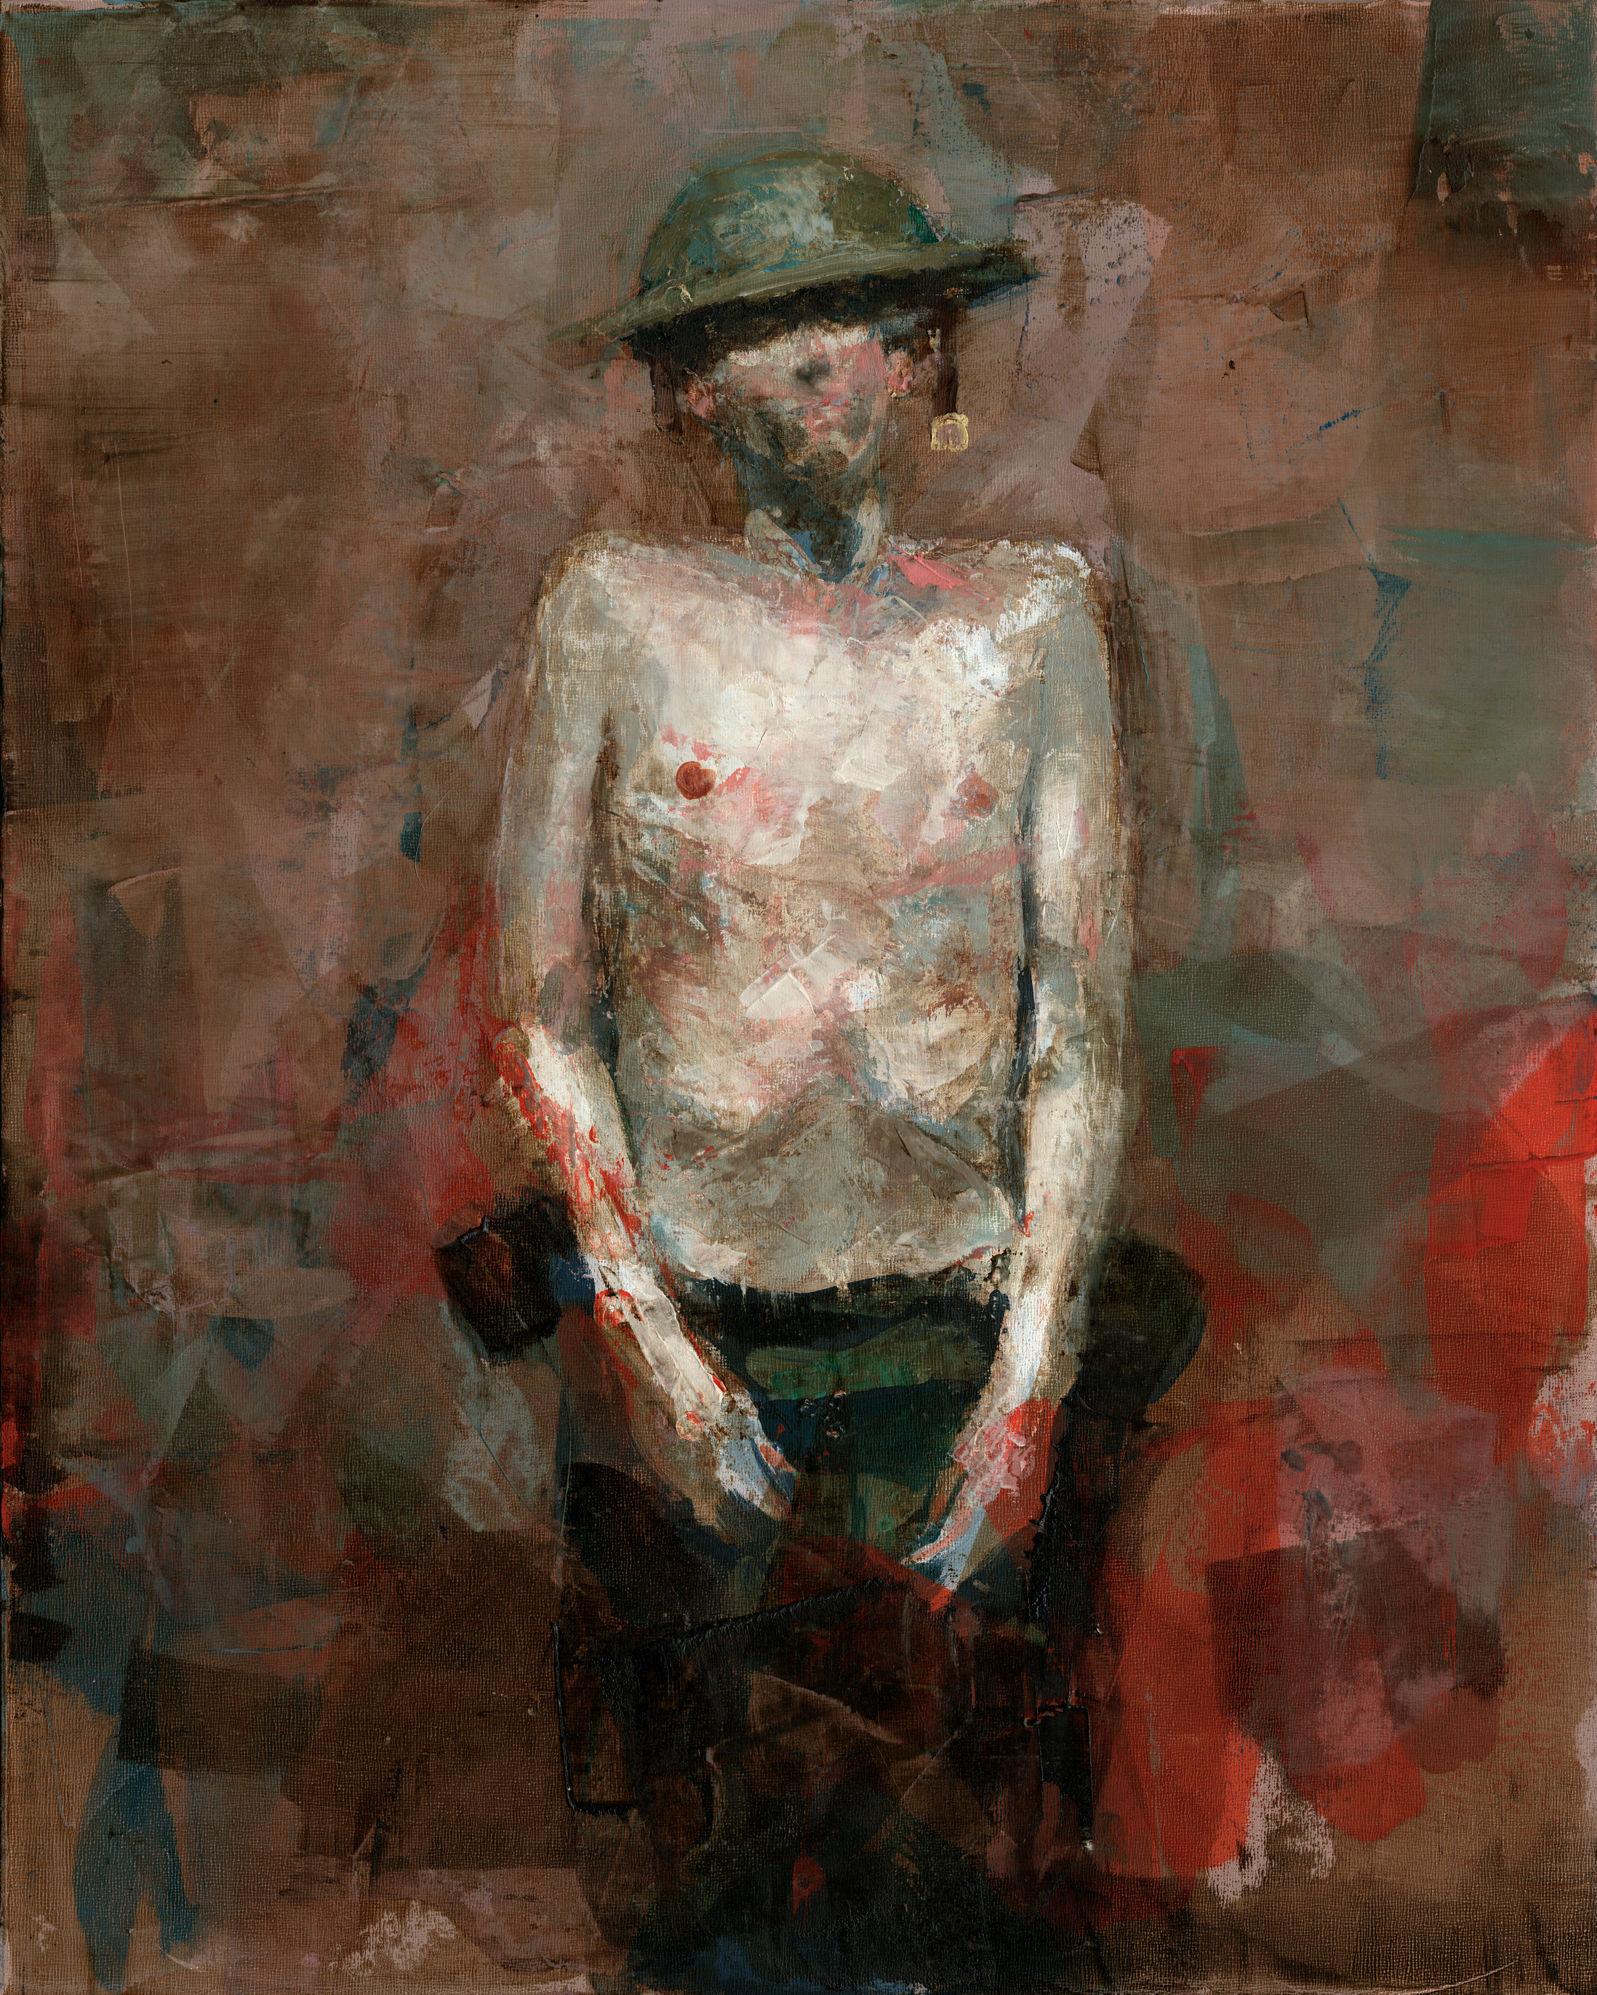 George Pratt Figurative Painting - "Unknown Soldier" Mixed media painting